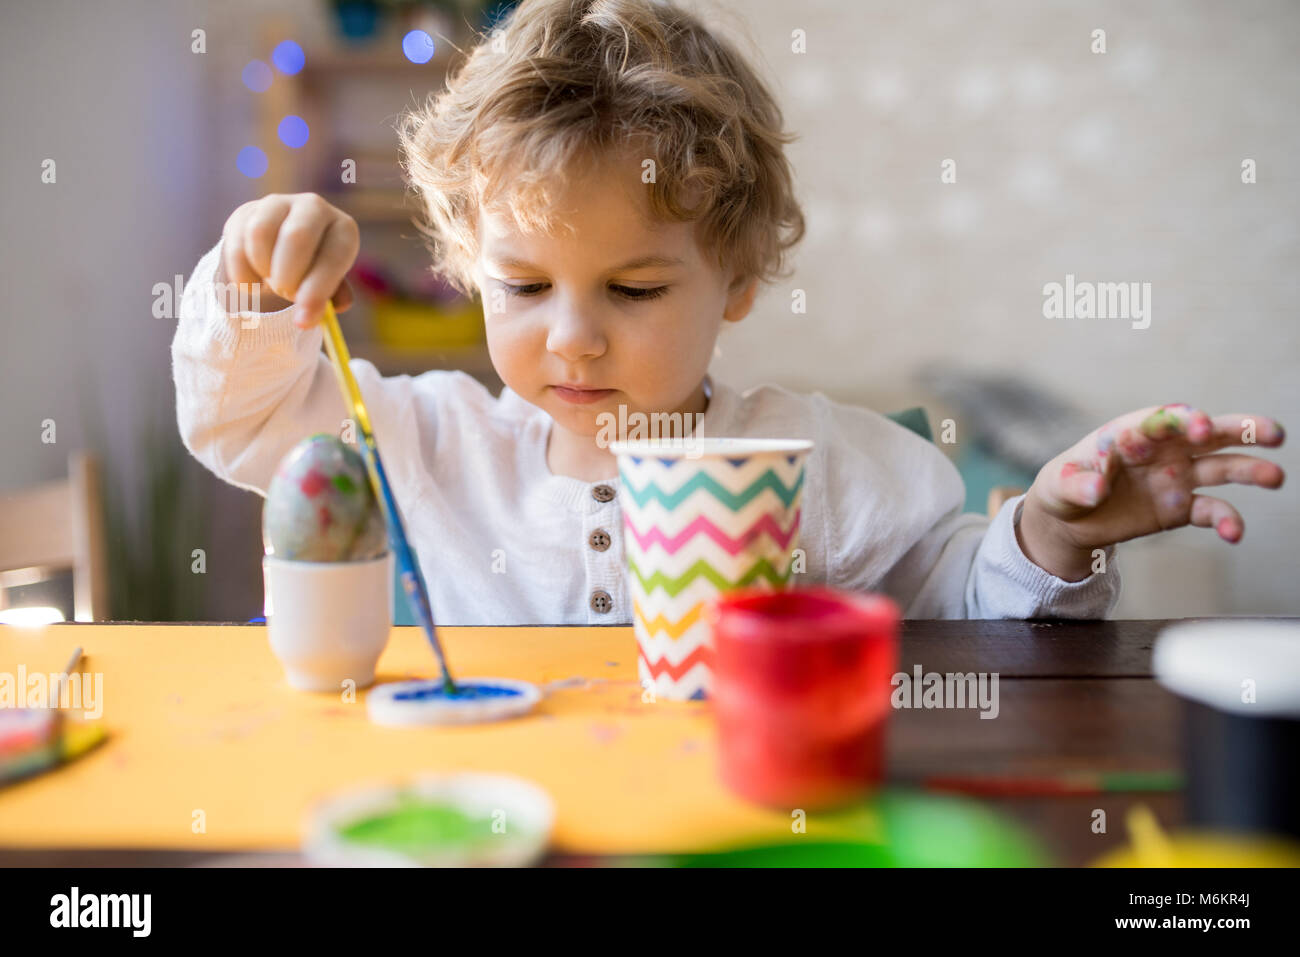 Cute Toddler Painting Easter Eggs Stock Photo